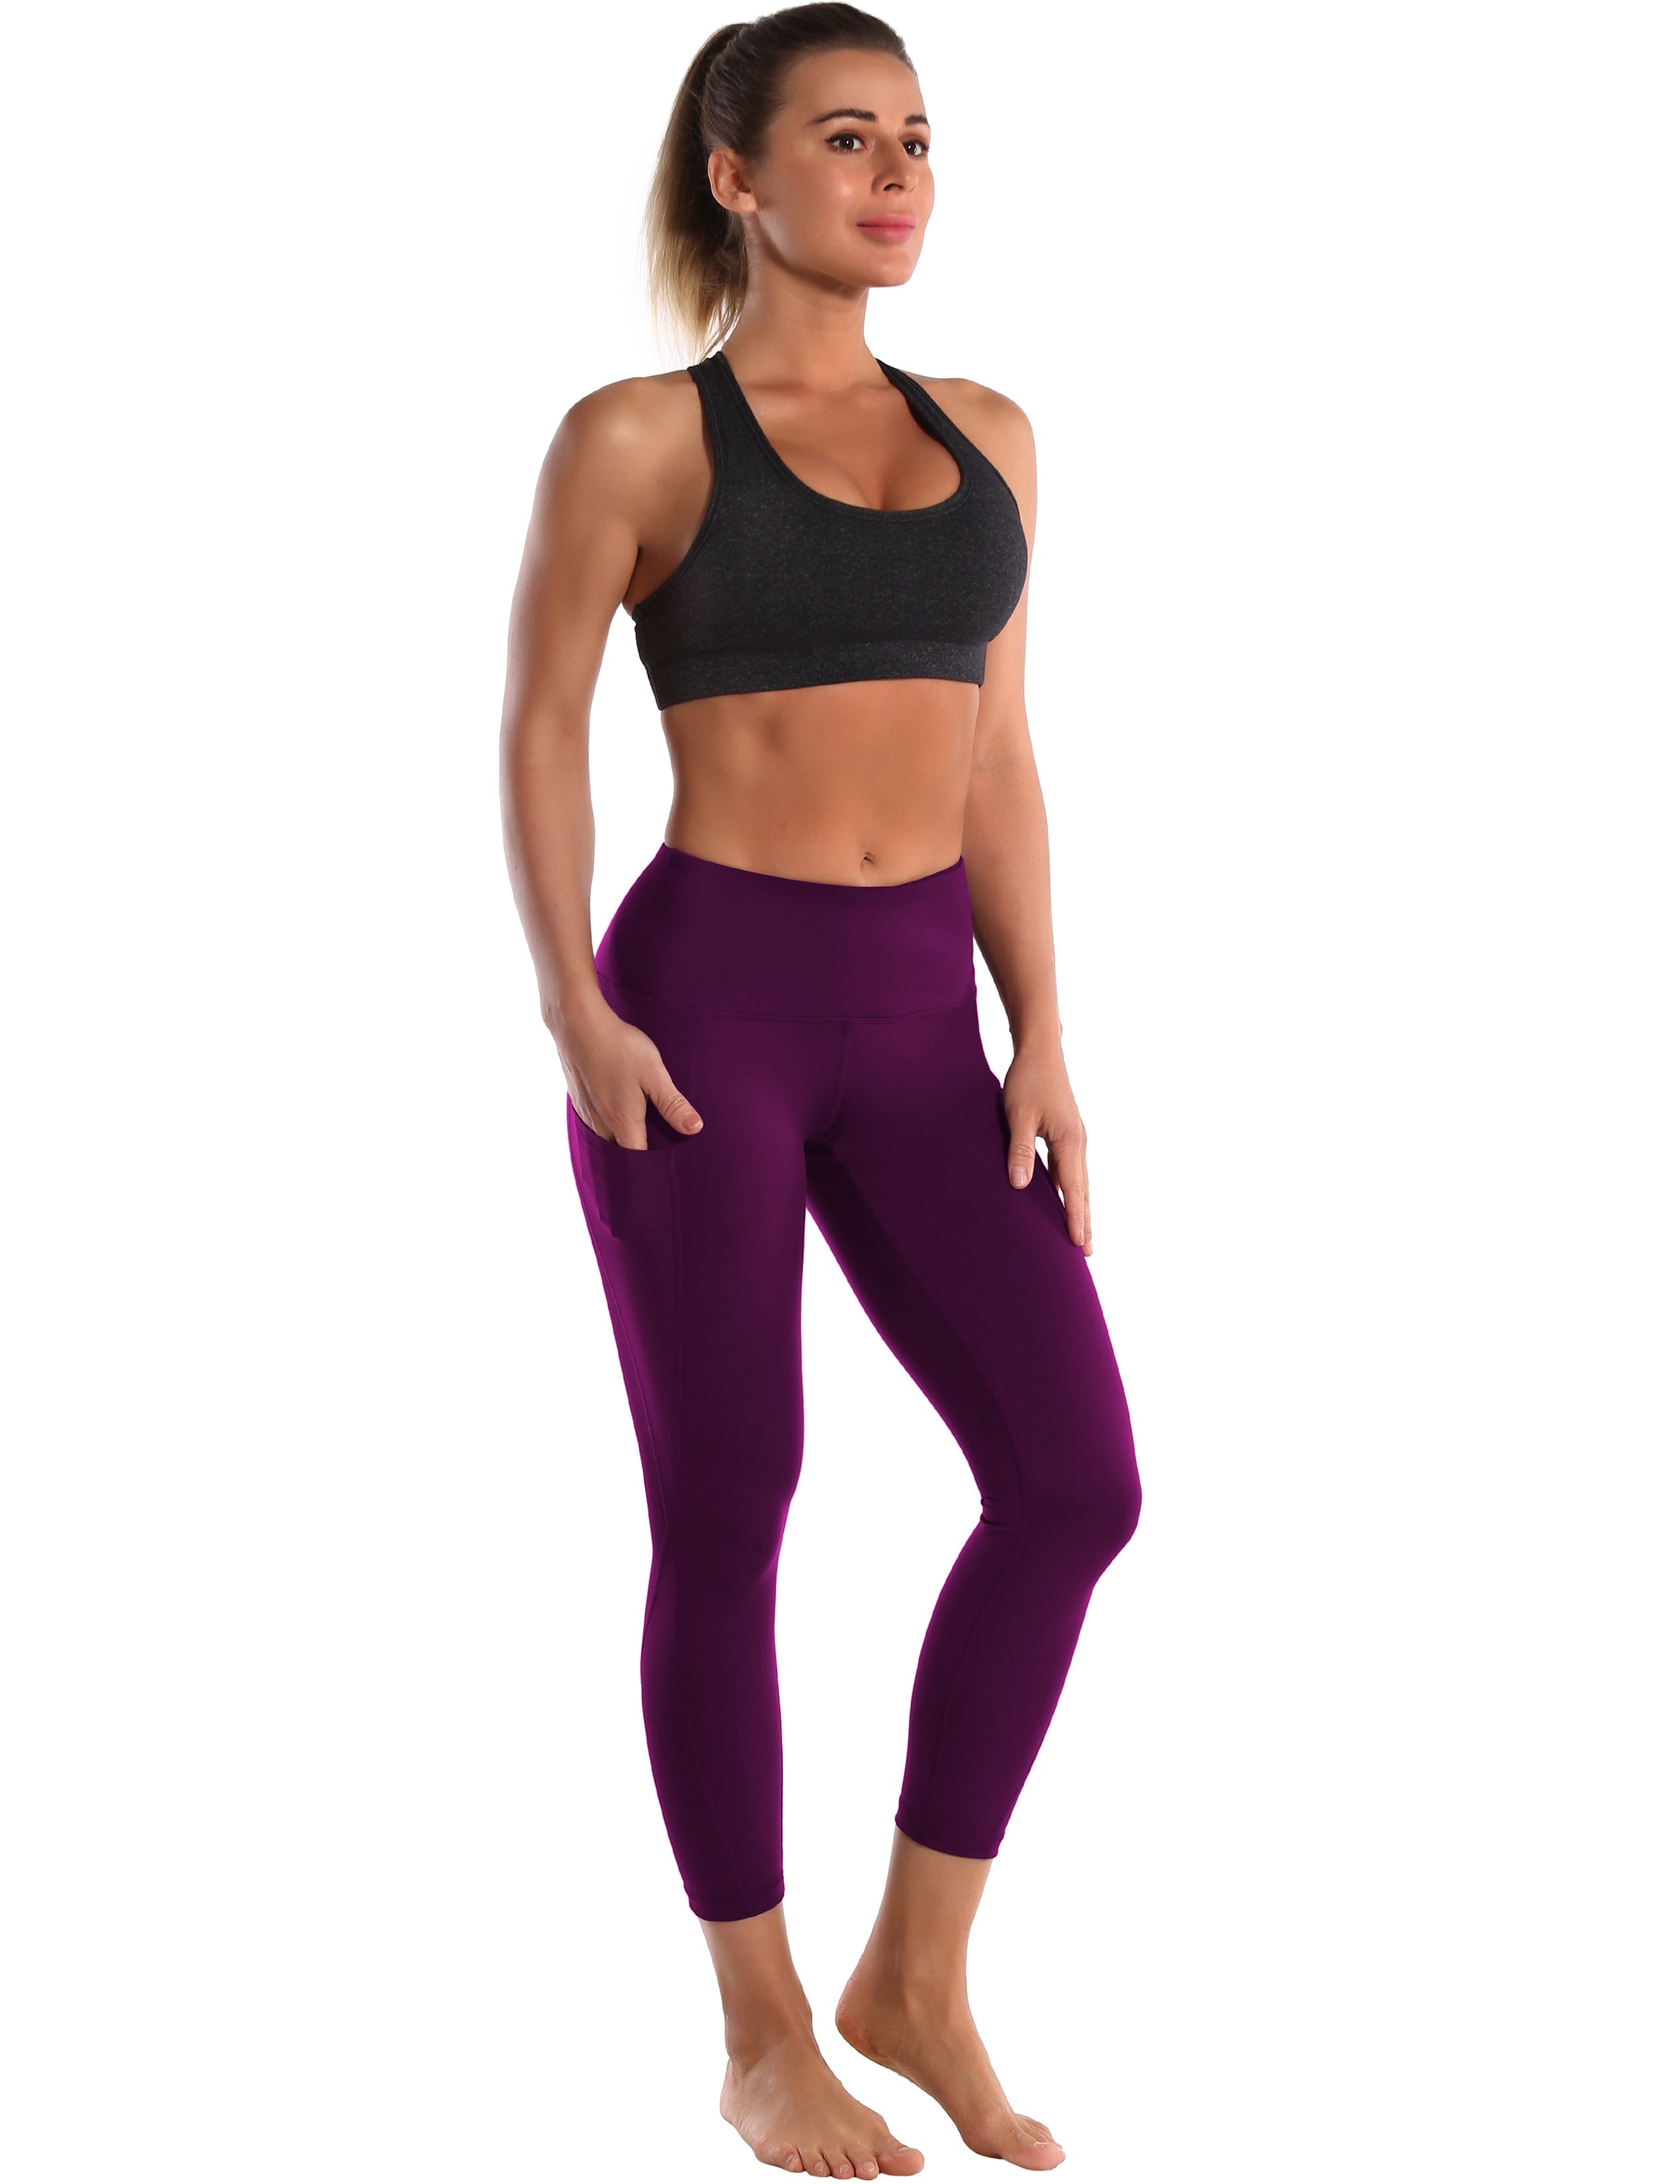 22" High Waist Side Pockets Capris plum 75%Nylon/25%Spandex Fabric doesn't attract lint easily 4-way stretch No see-through Moisture-wicking Tummy control Inner pocket